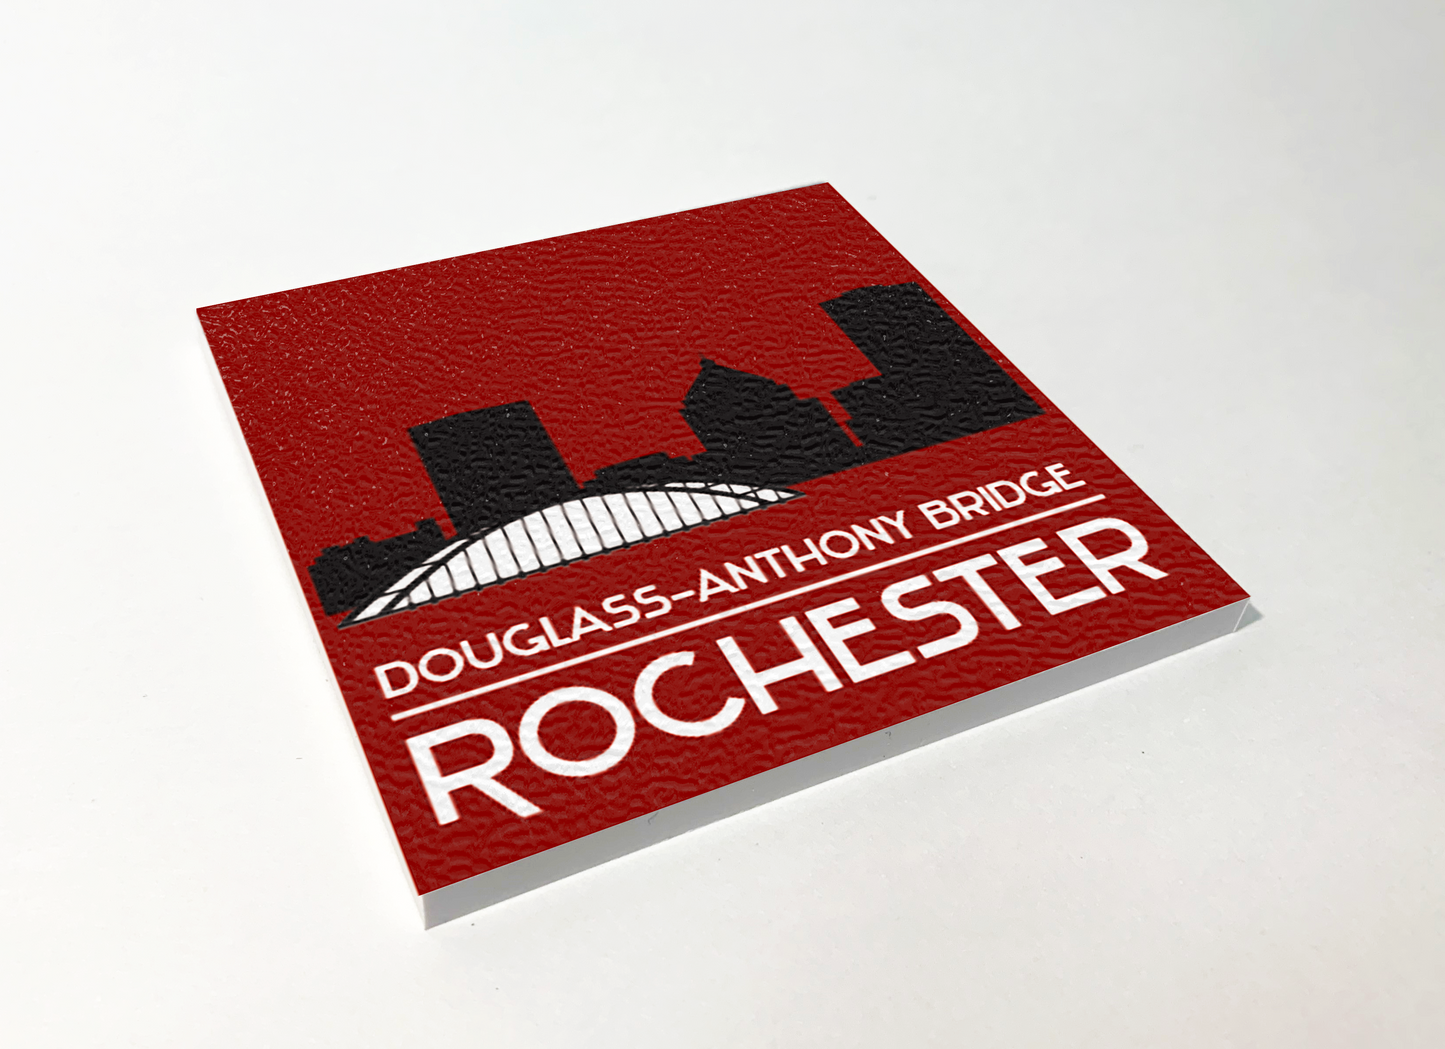 Rochester Skyline Silhouette ABS Plastic Coaster 4 Pack Designed and Handcrafted in Buffalo NY